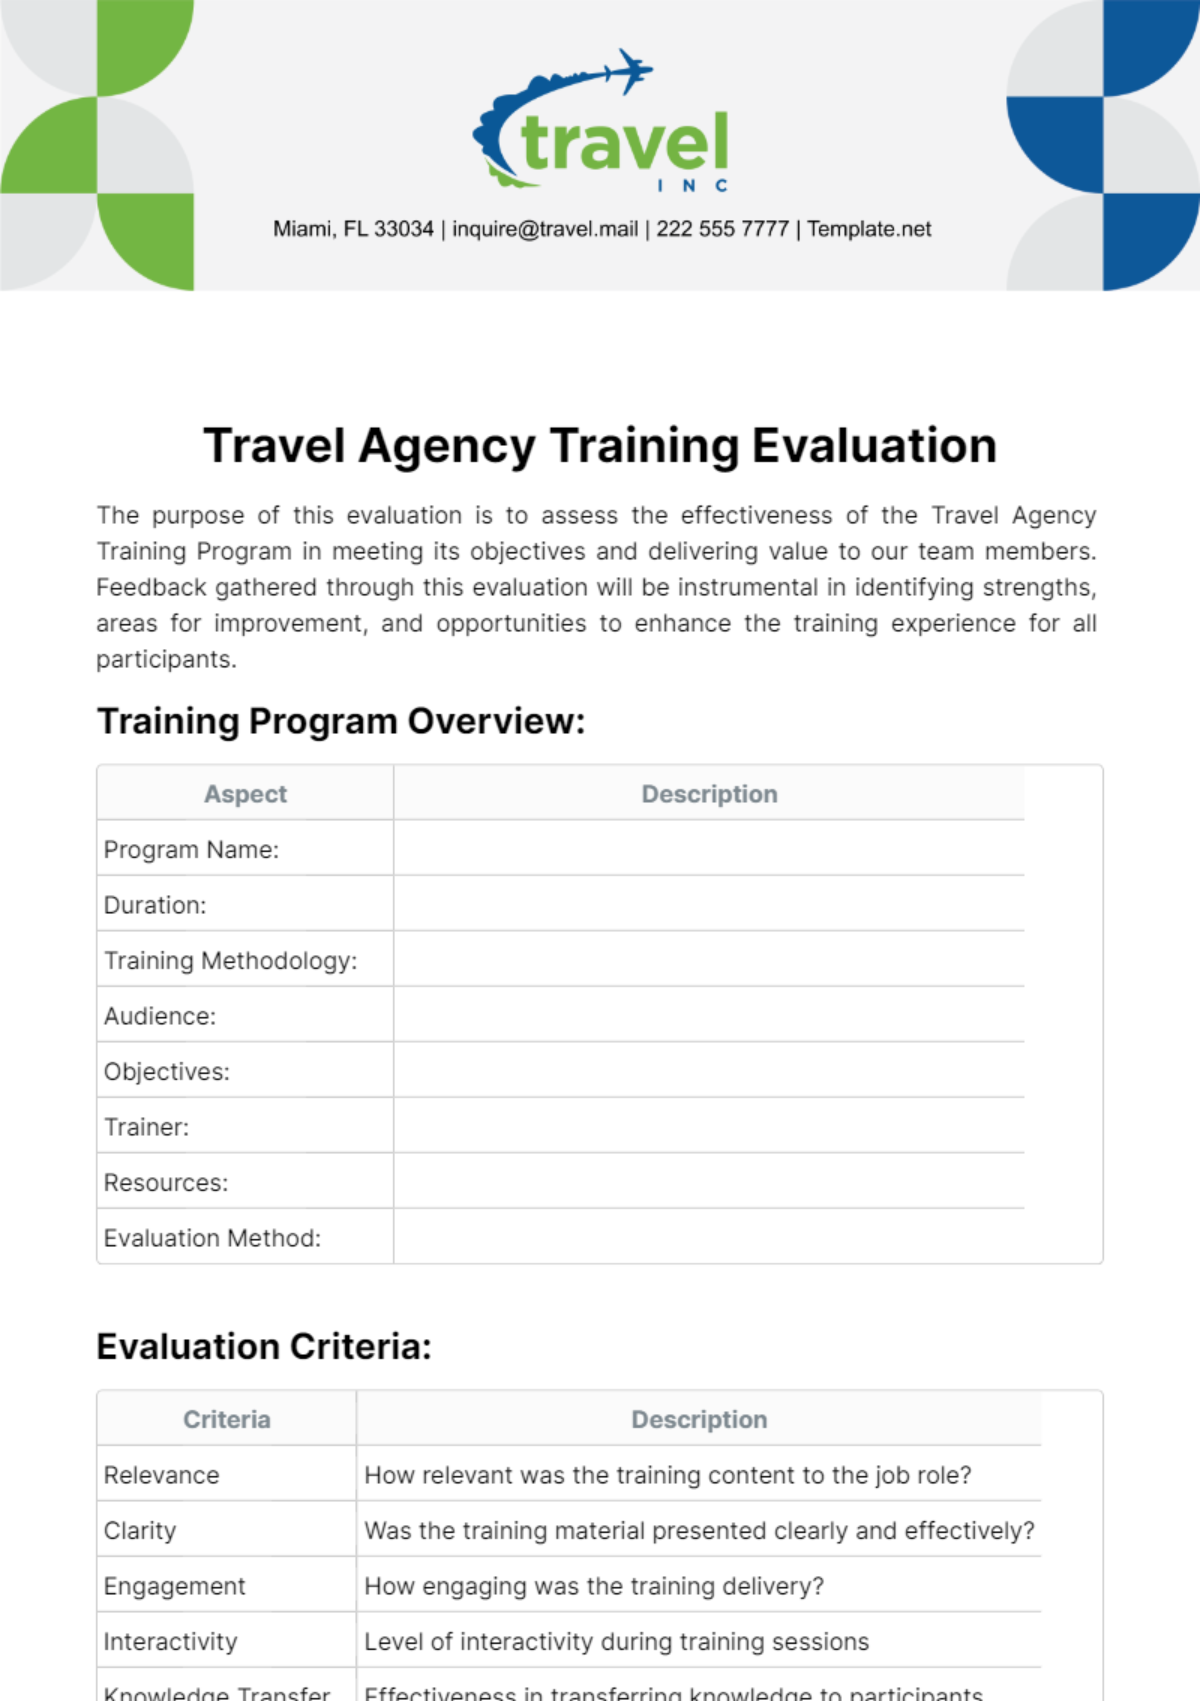 Travel Agency Training Evaluation Template